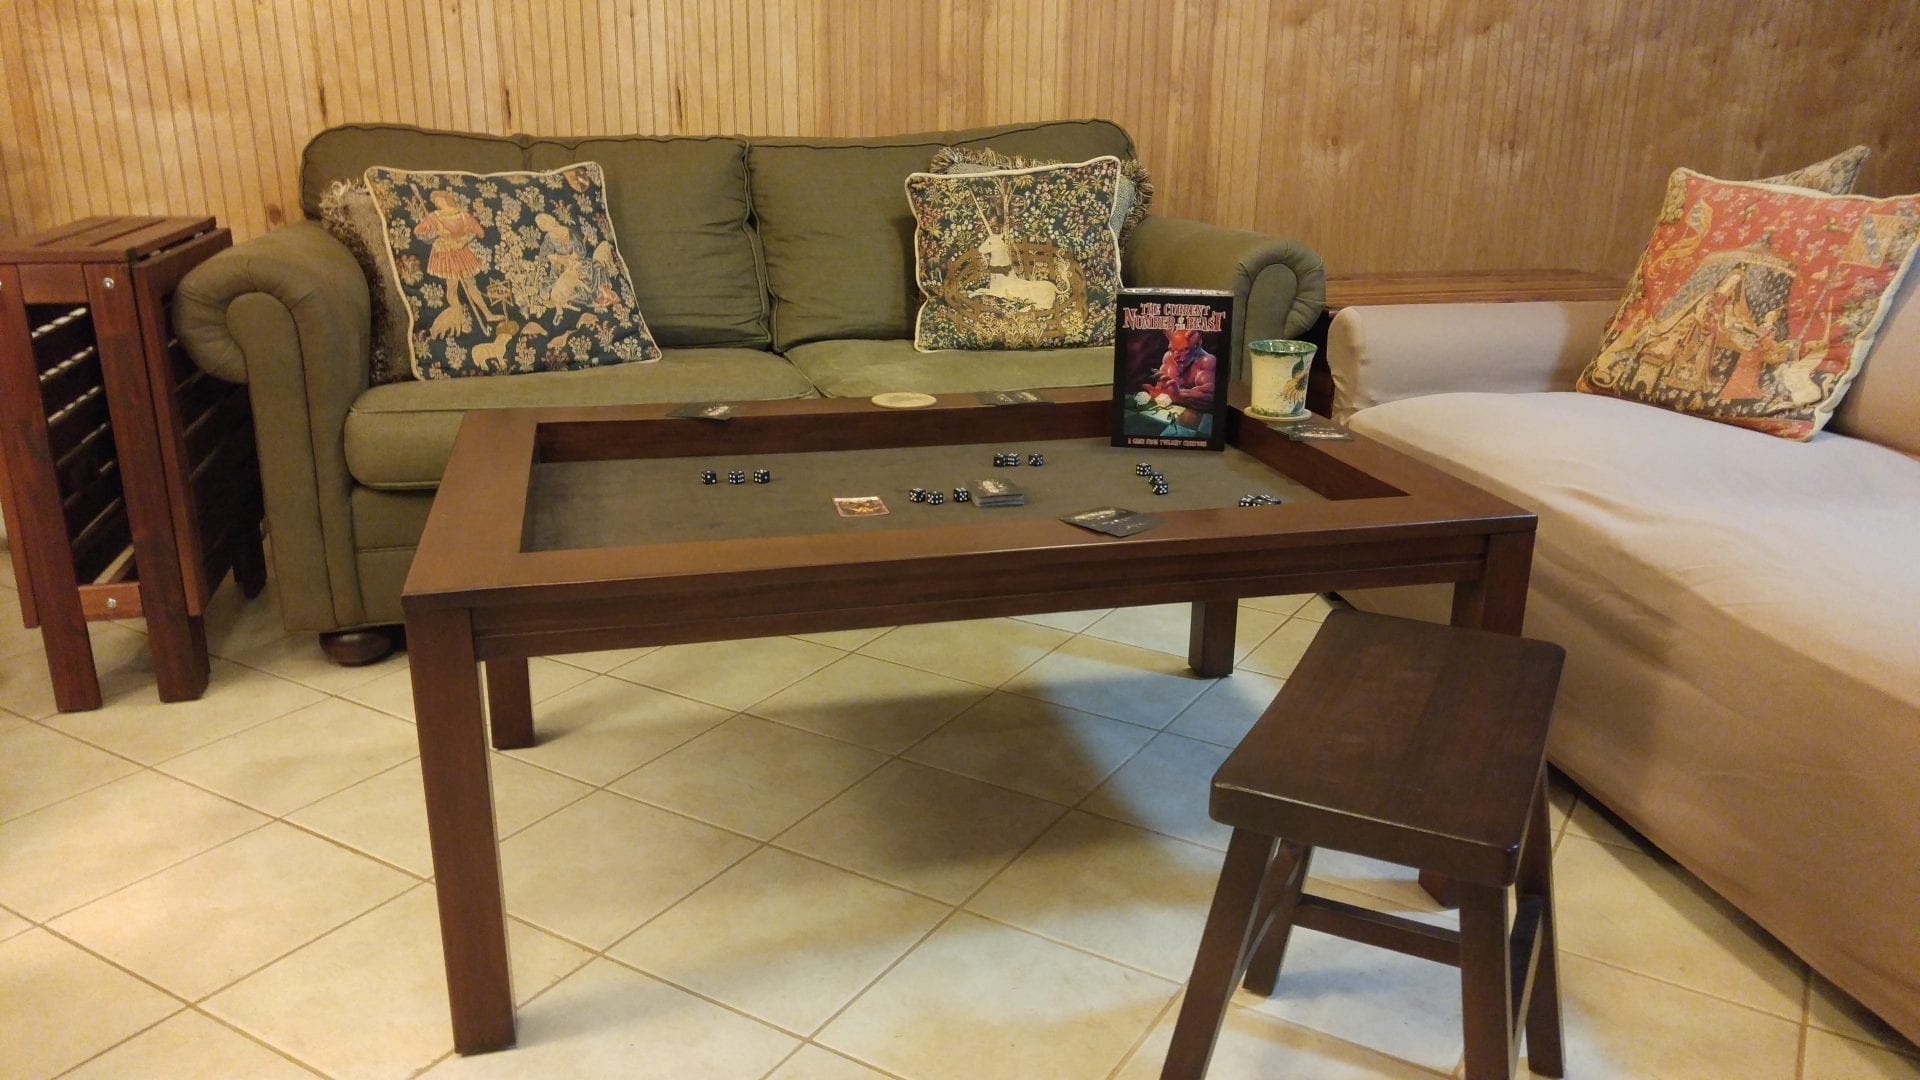 Coffee Game Table in Cherry finish and Dark Brown Fabric with Side Table/Bench in Sagamore Hill finish. Photo by Jodi. :)